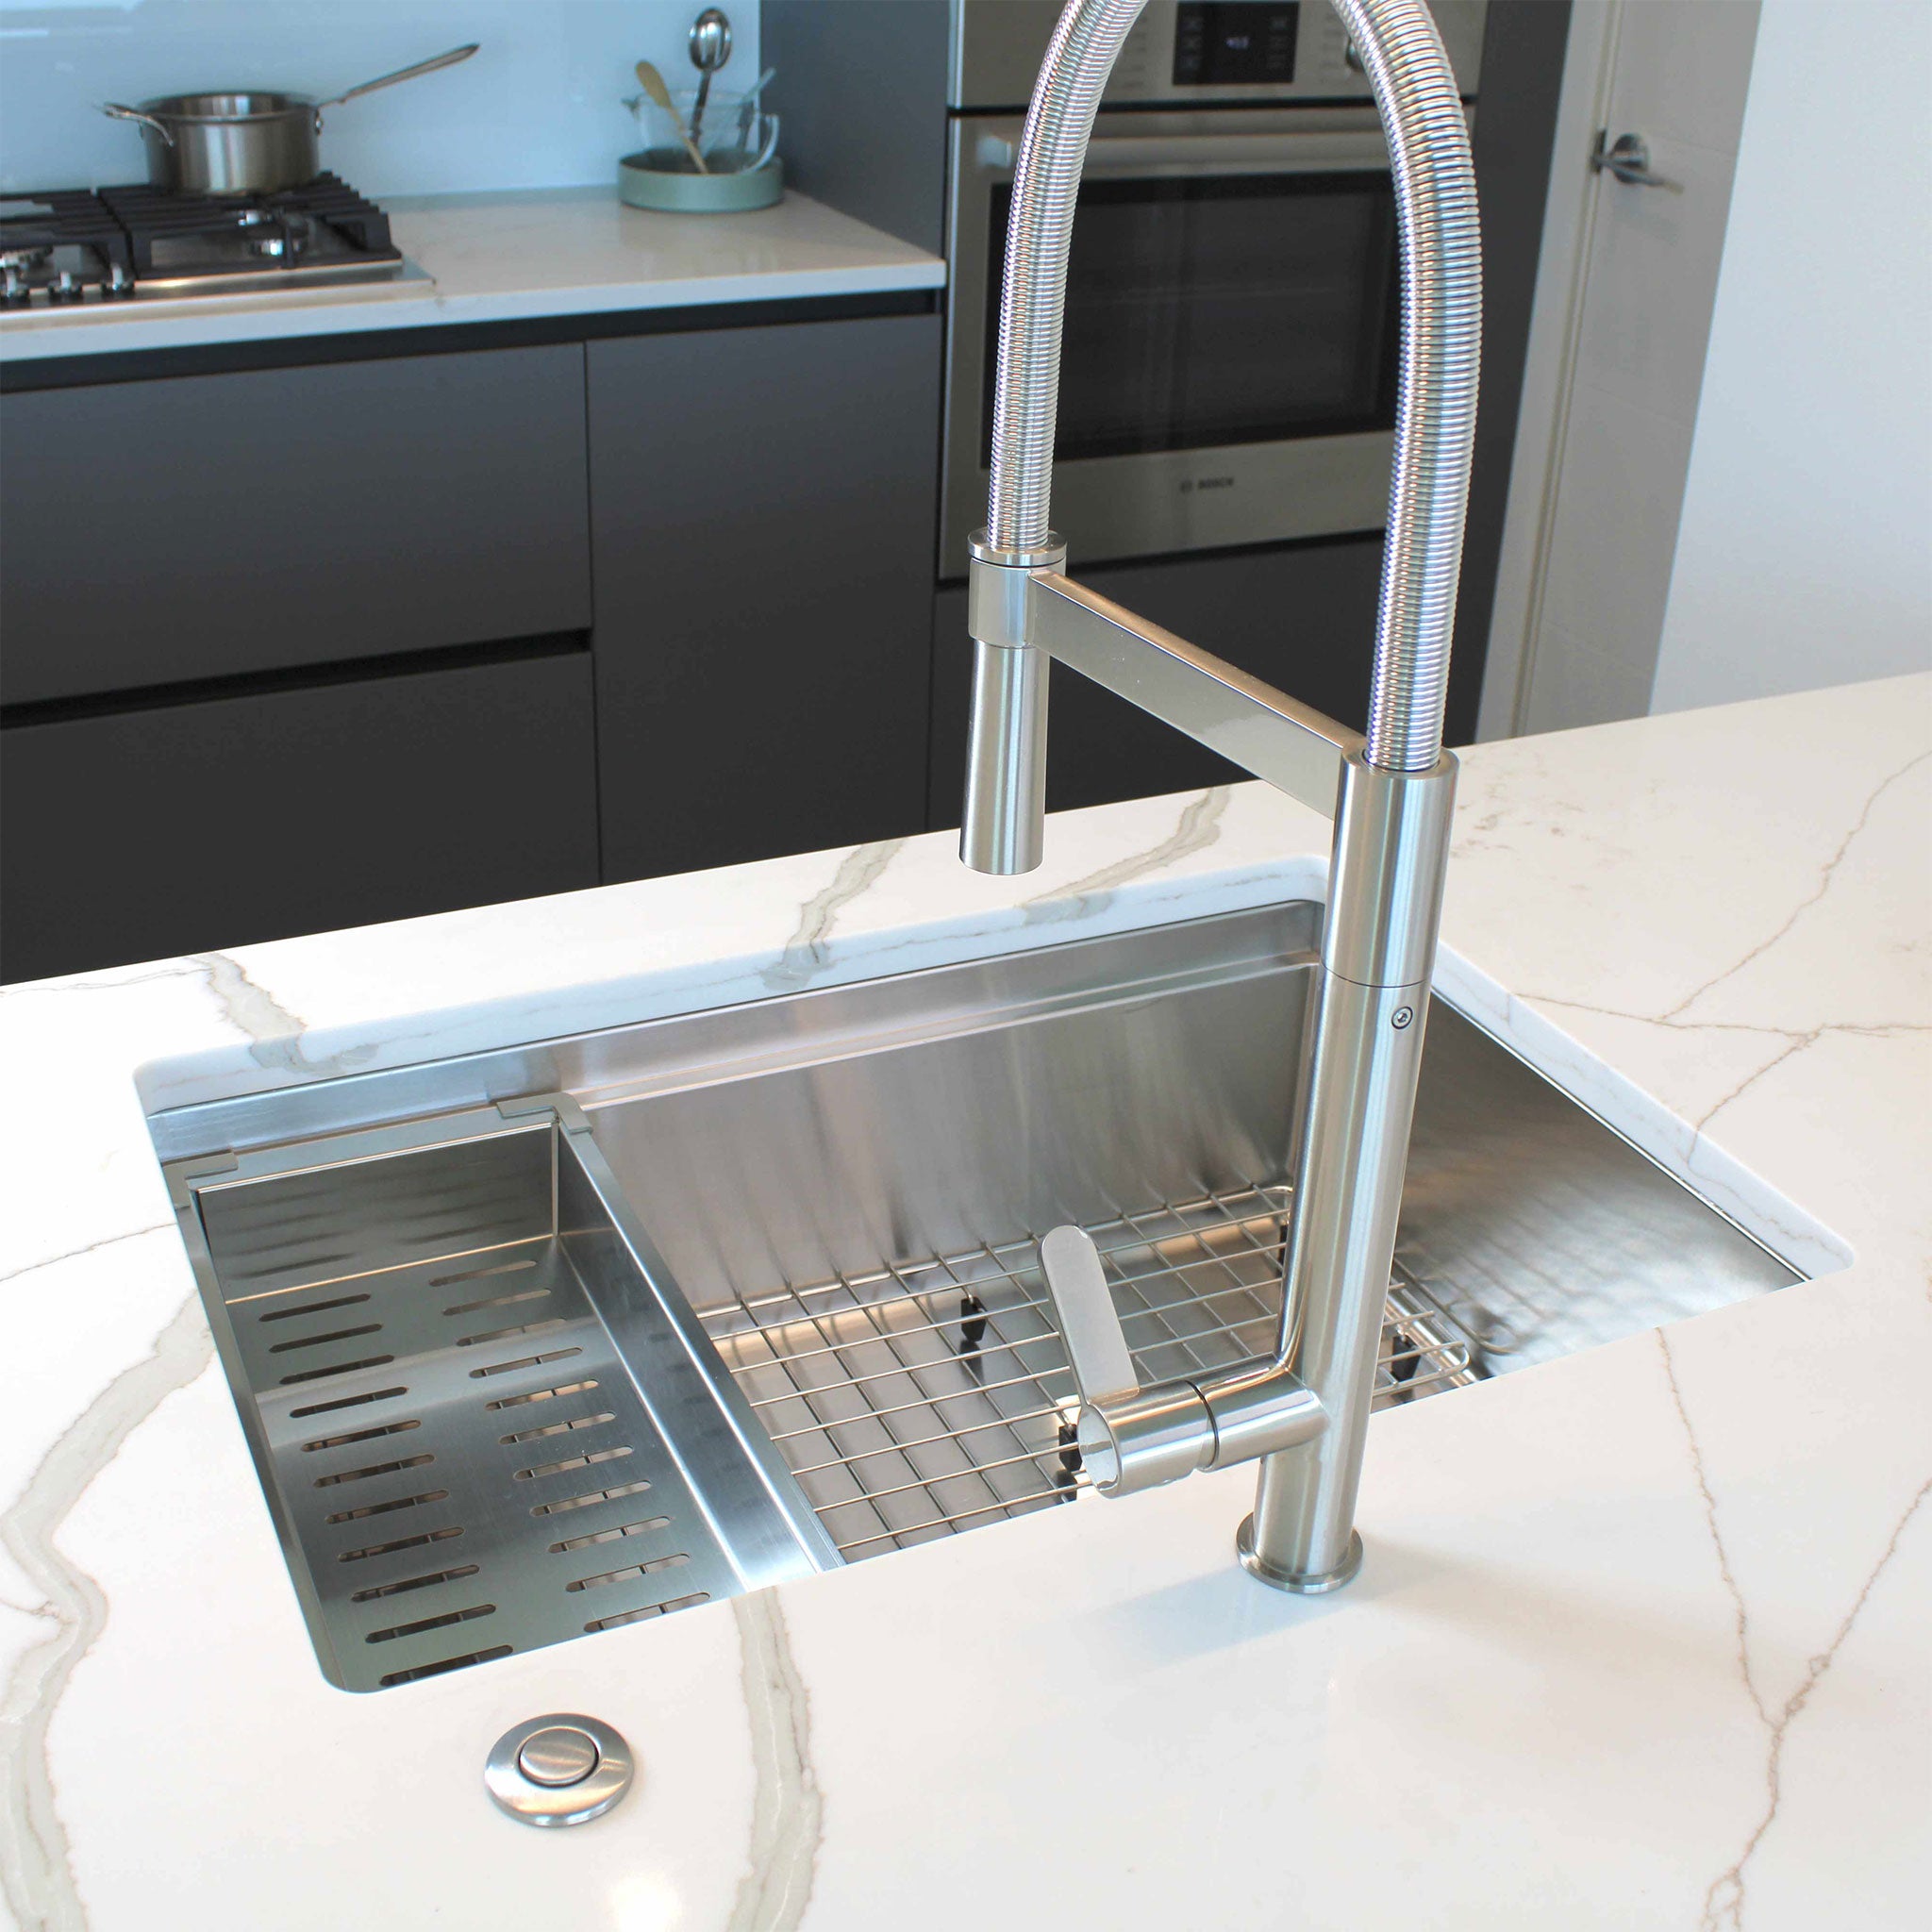 The stainless steel colander on a 28" workstation sink from Create Good Sinks and grid.